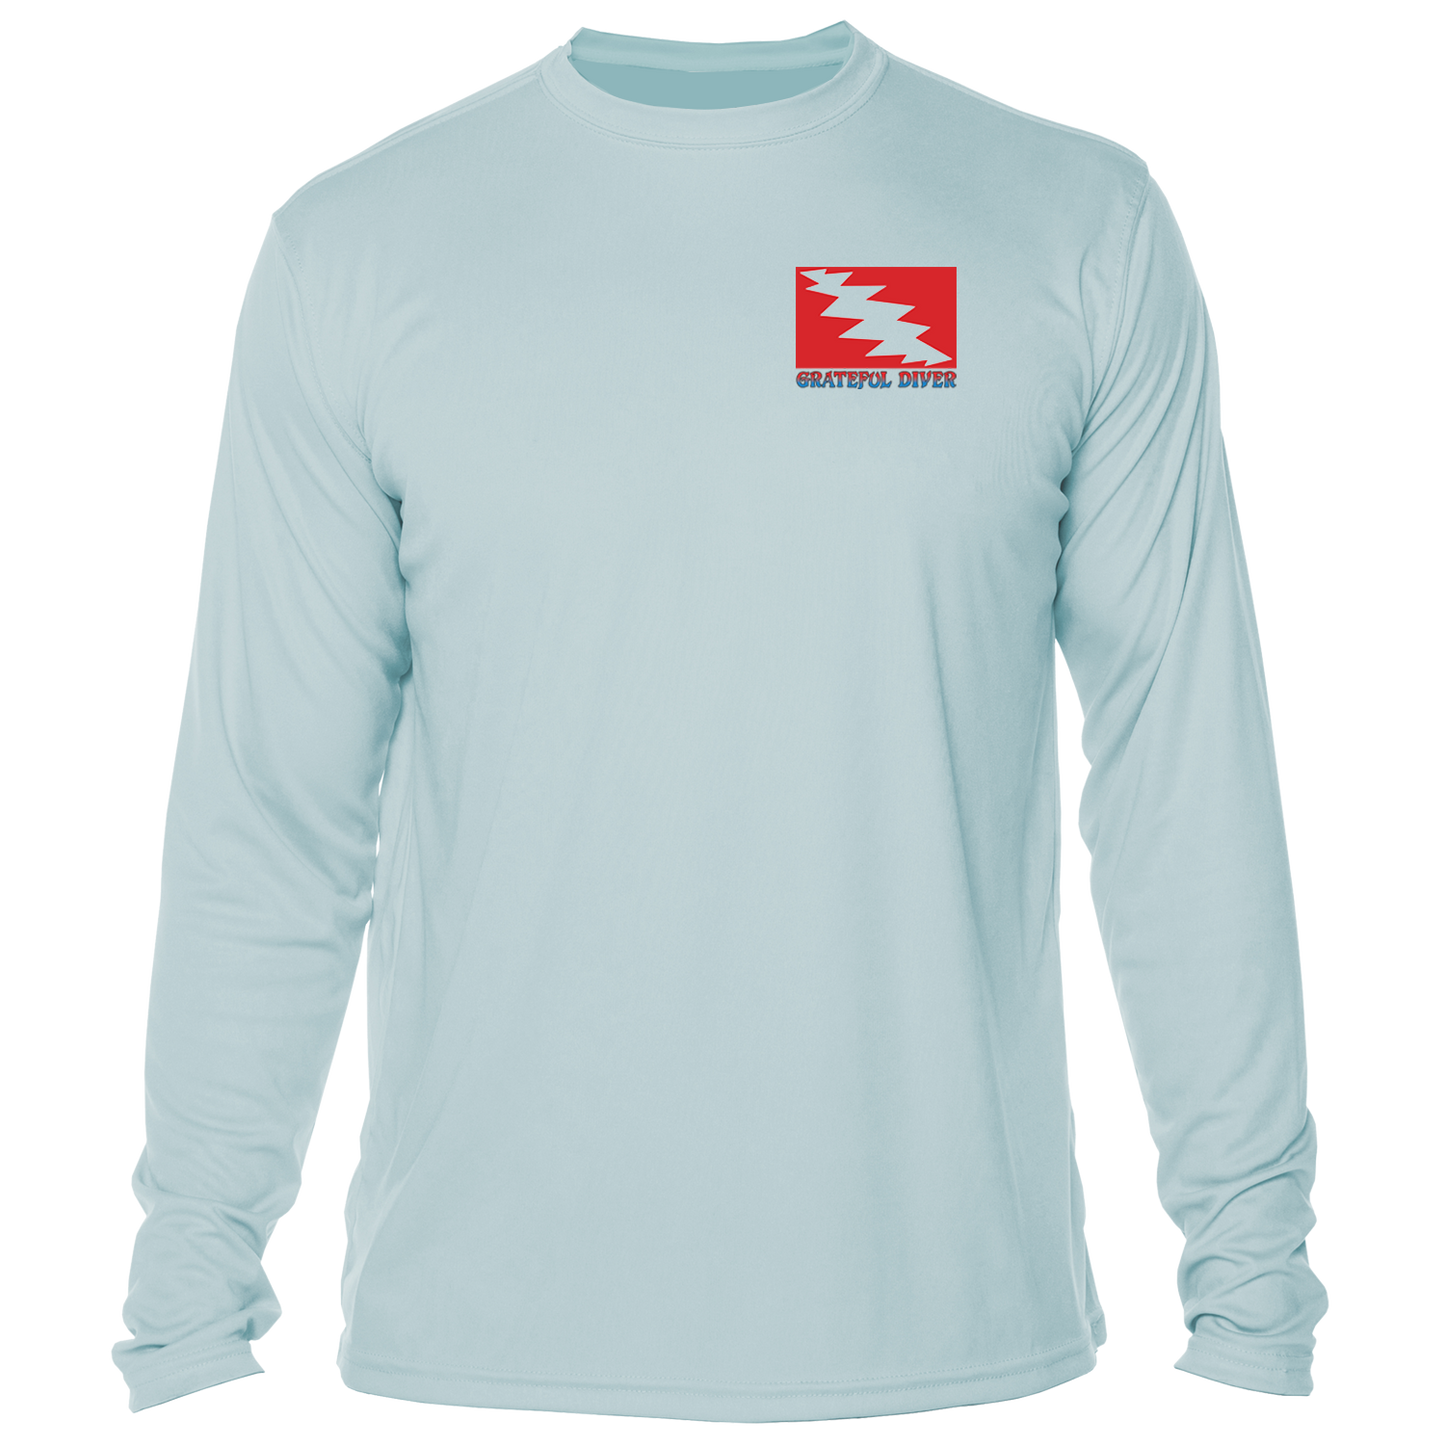 front of Grateful Diver's Artist's Collection: Island Life UV Shirt in arctic blue showing the classic dive flag logo